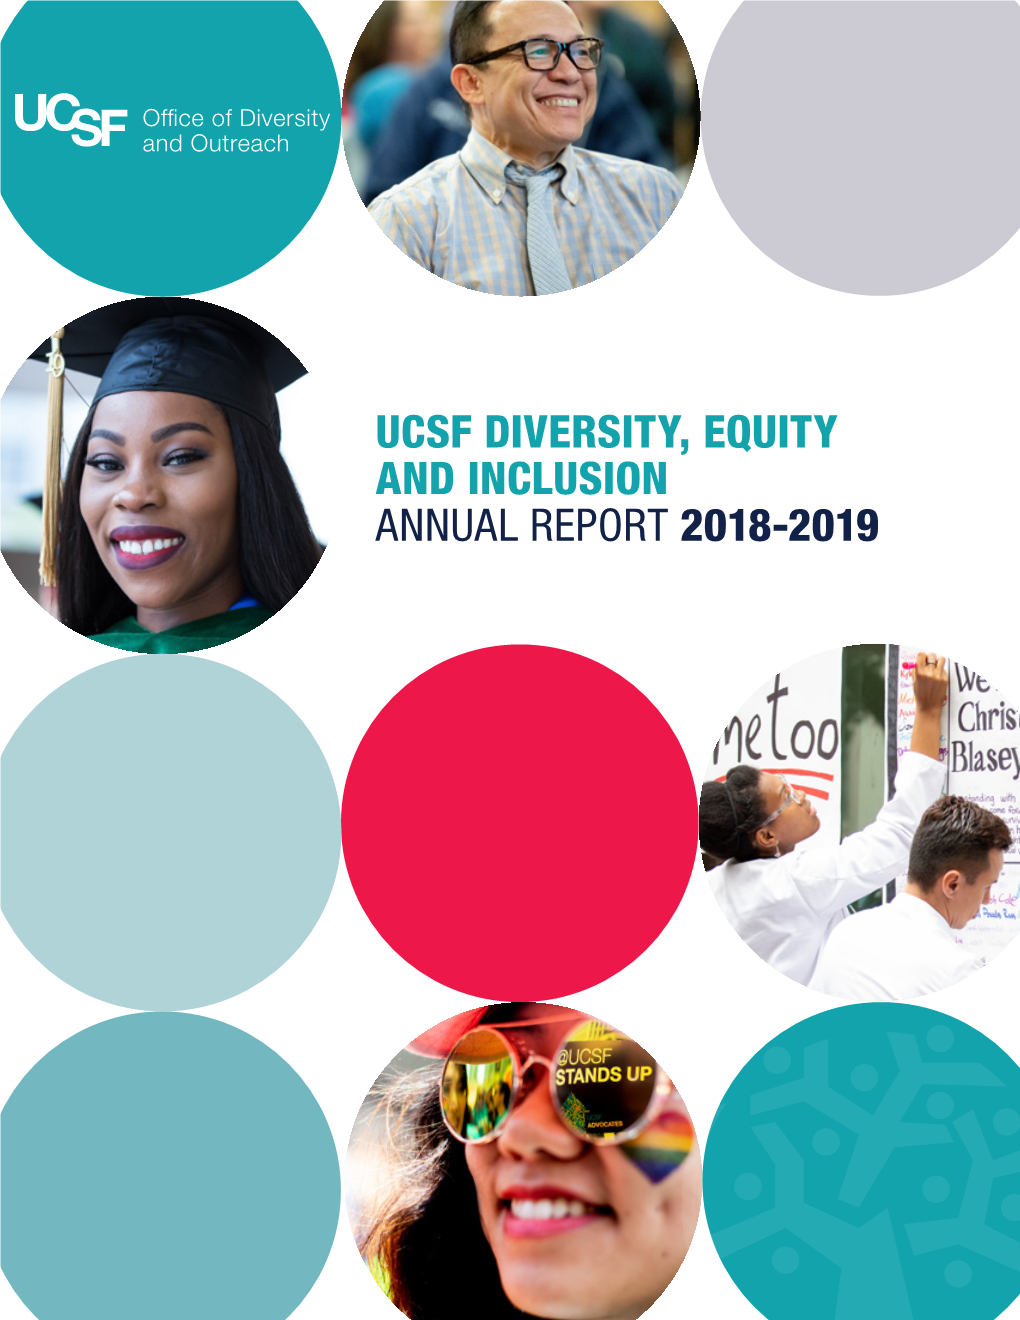 UCSF Diversity, Equity and Inclusion Annual Report 2018-2019